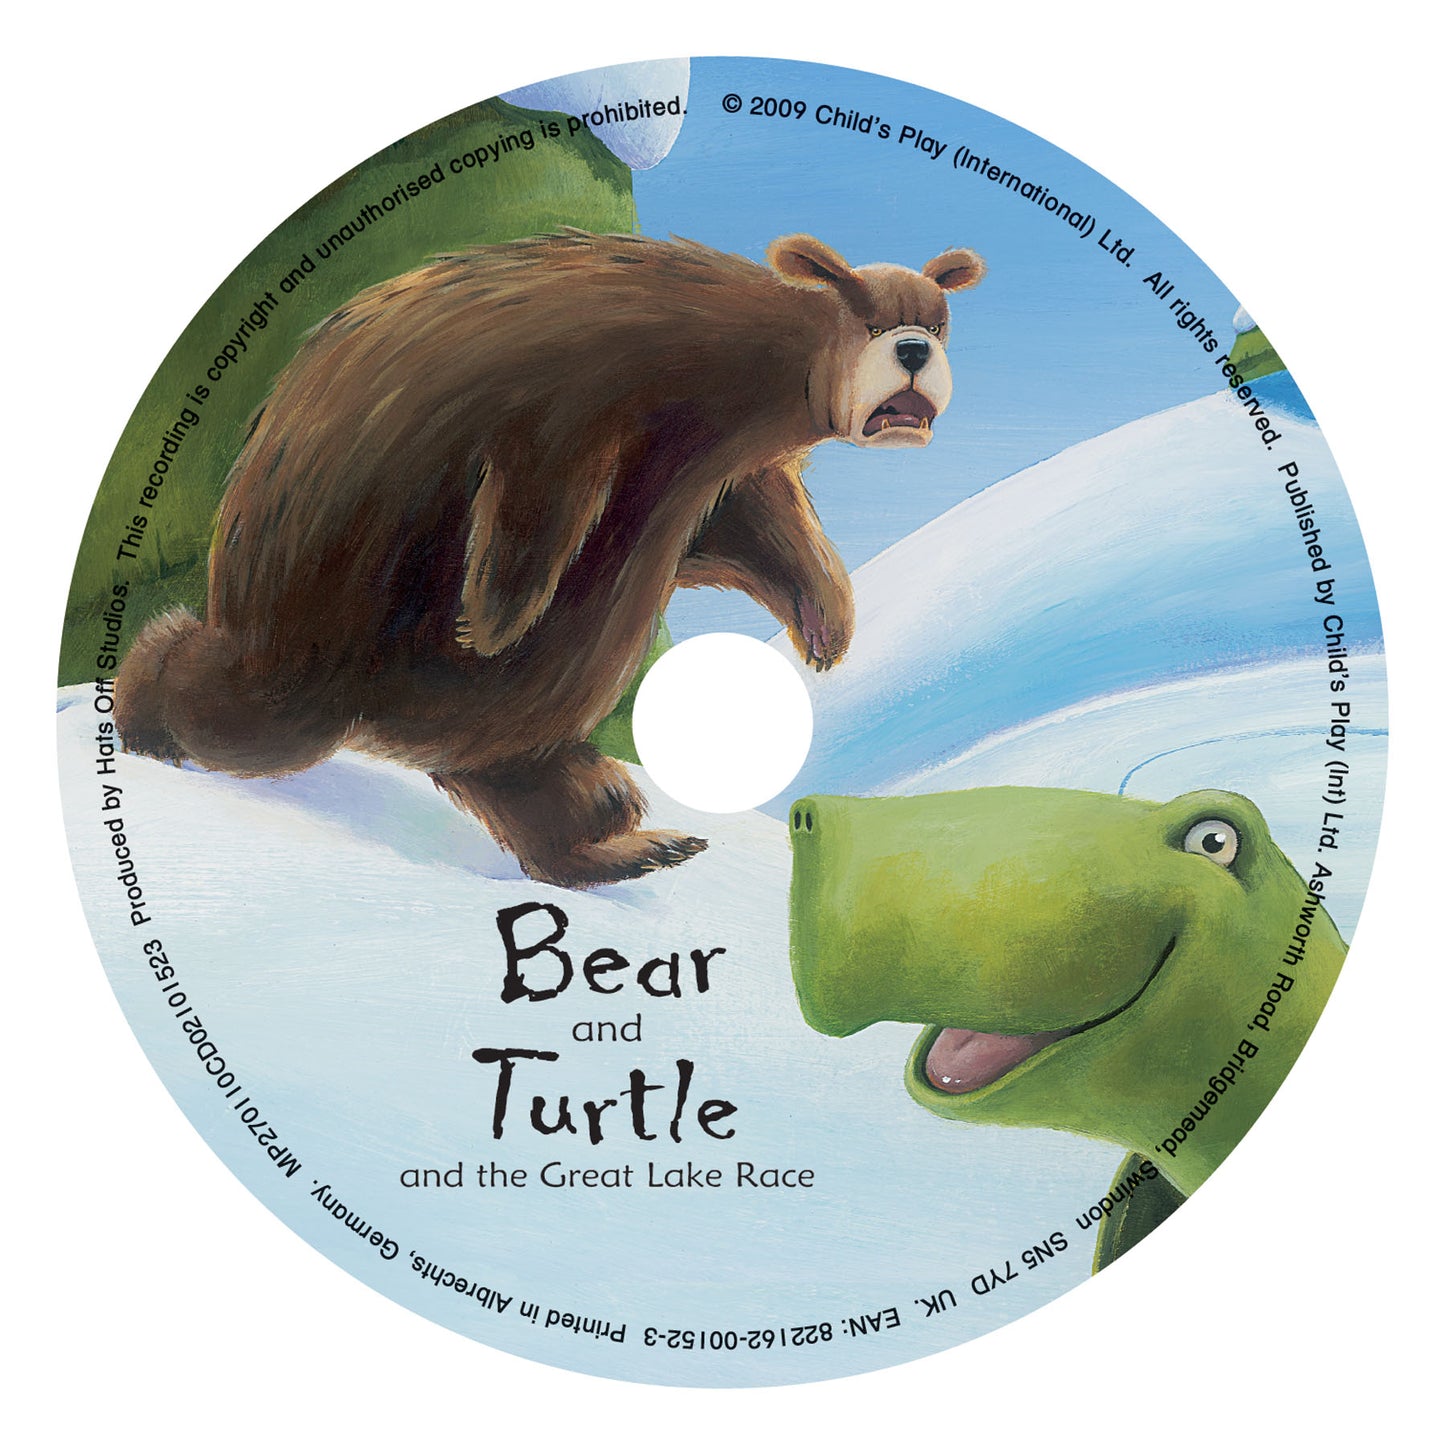 Bear and Turtle and the Great Lake Race CD